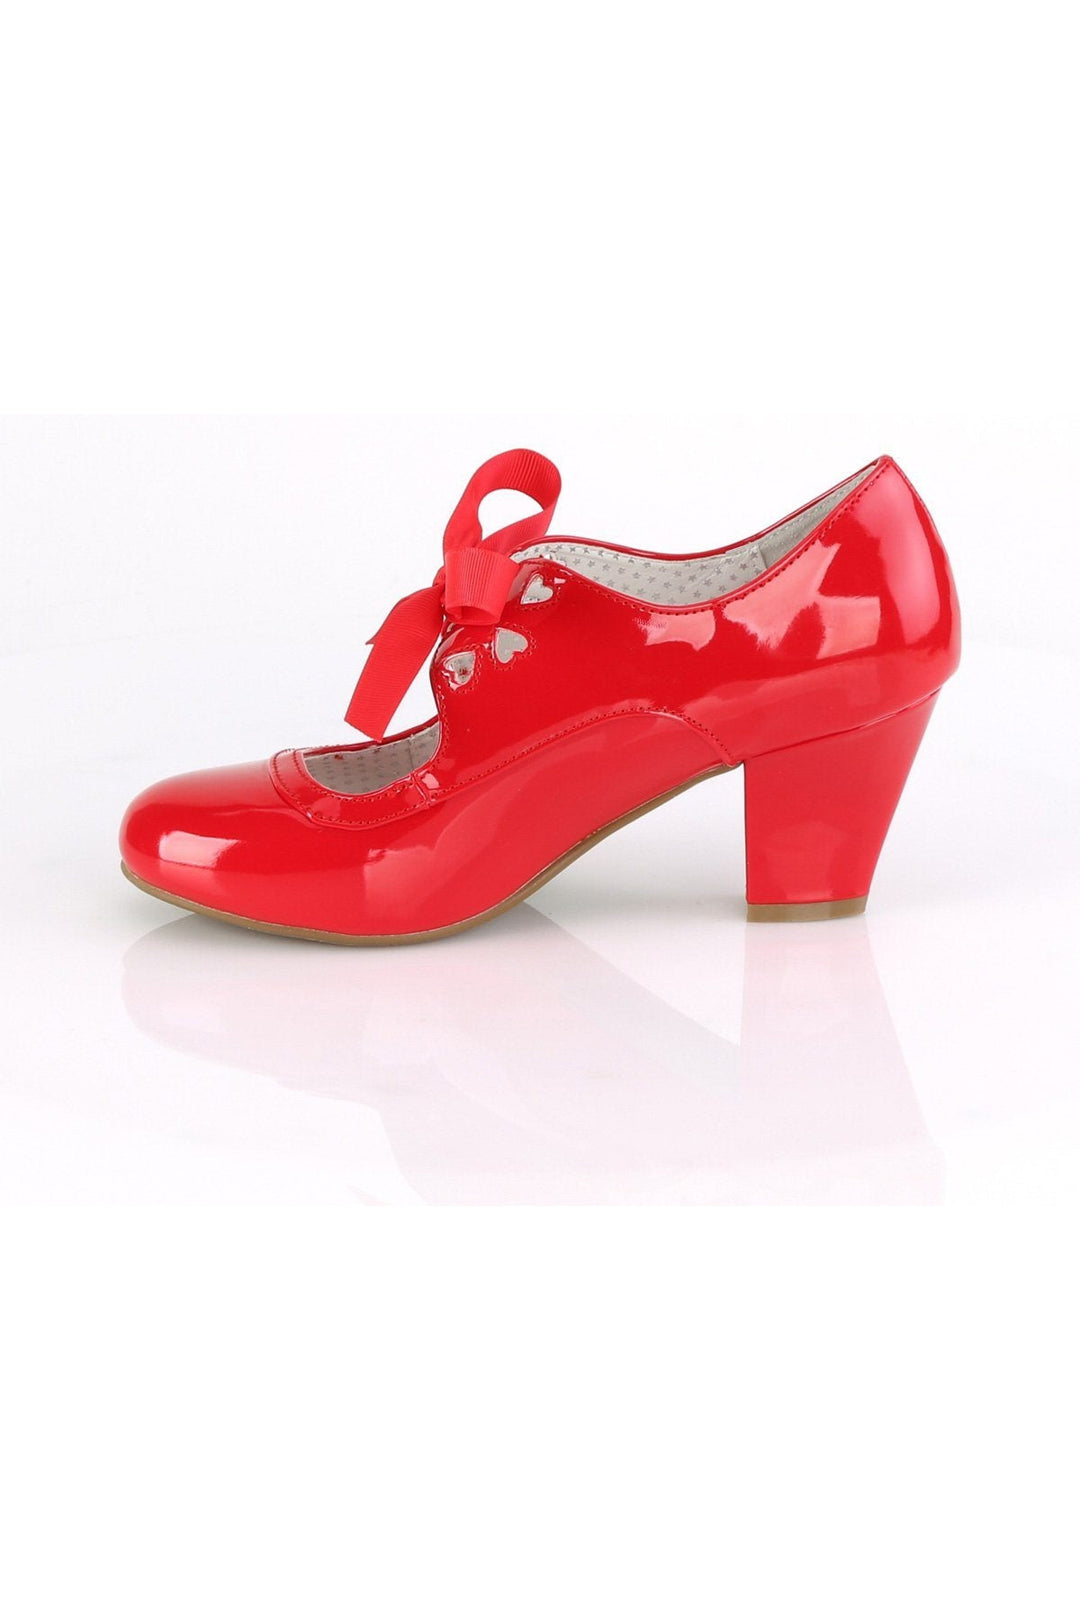 WIGGLE-32 Pump | Red Patent-Pumps-Pin Up Couture-SEXYSHOES.COM